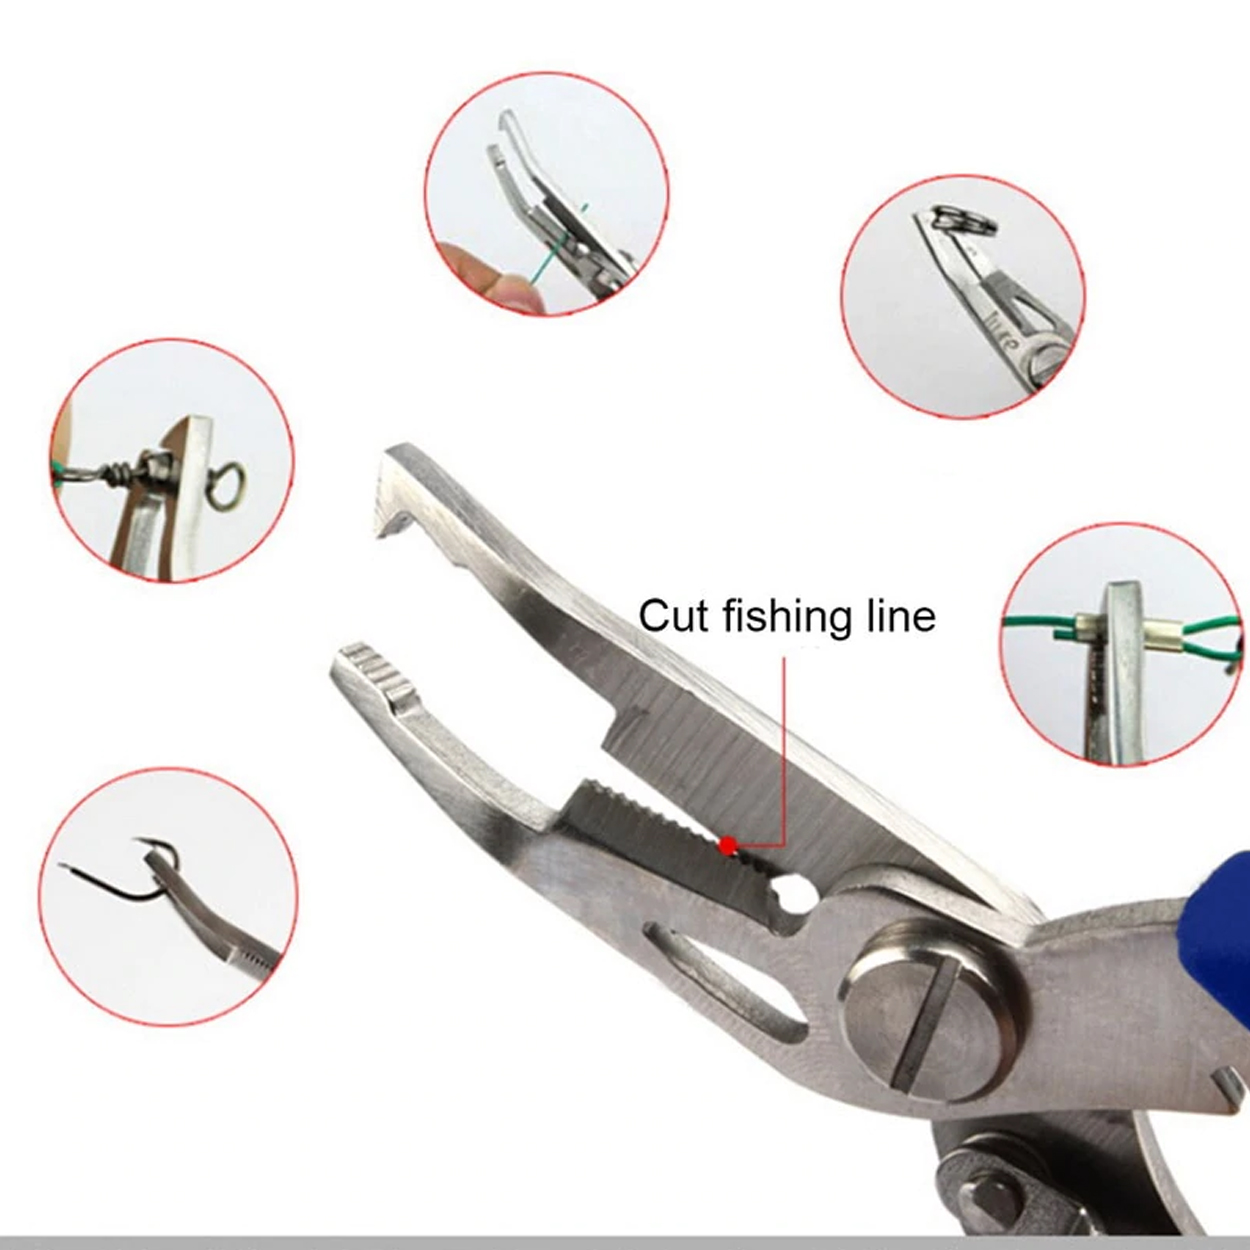 MAIA Stainless Steel Fishing Pliers Scissors Line Cutter Remove